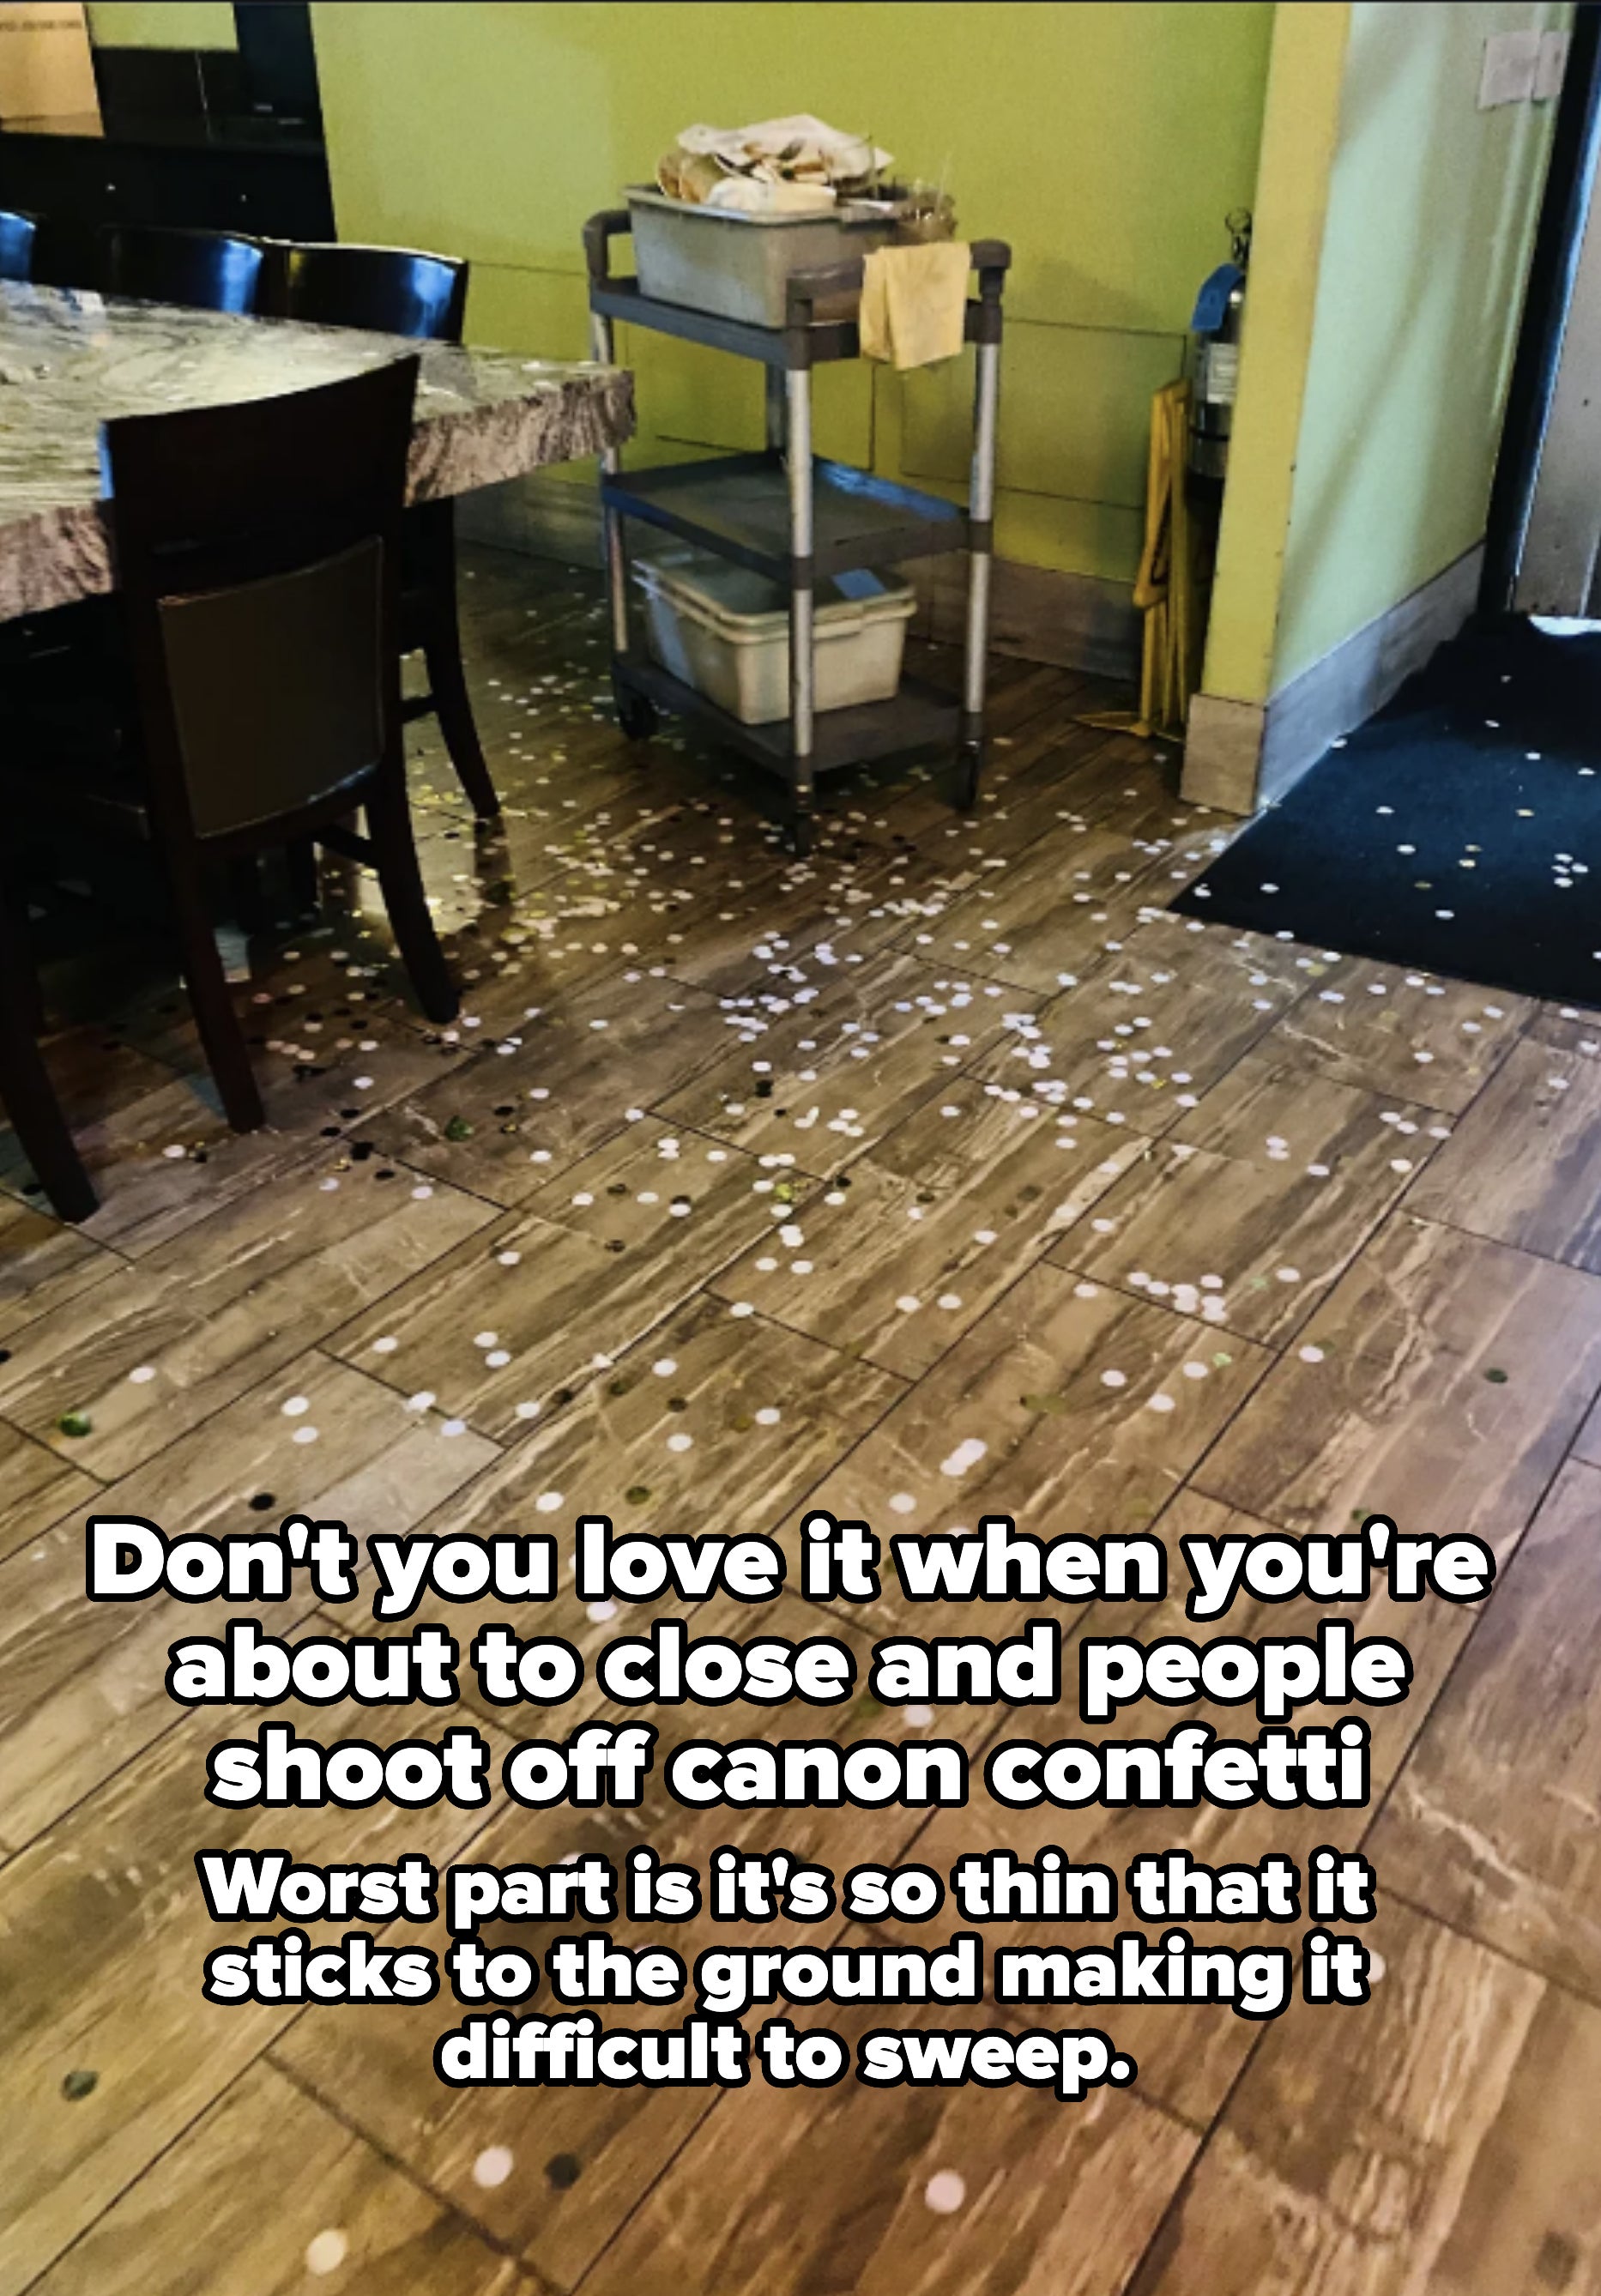 A restaurant floor scattered with confetti, in front of a table and a utility cart with cleaning supplies